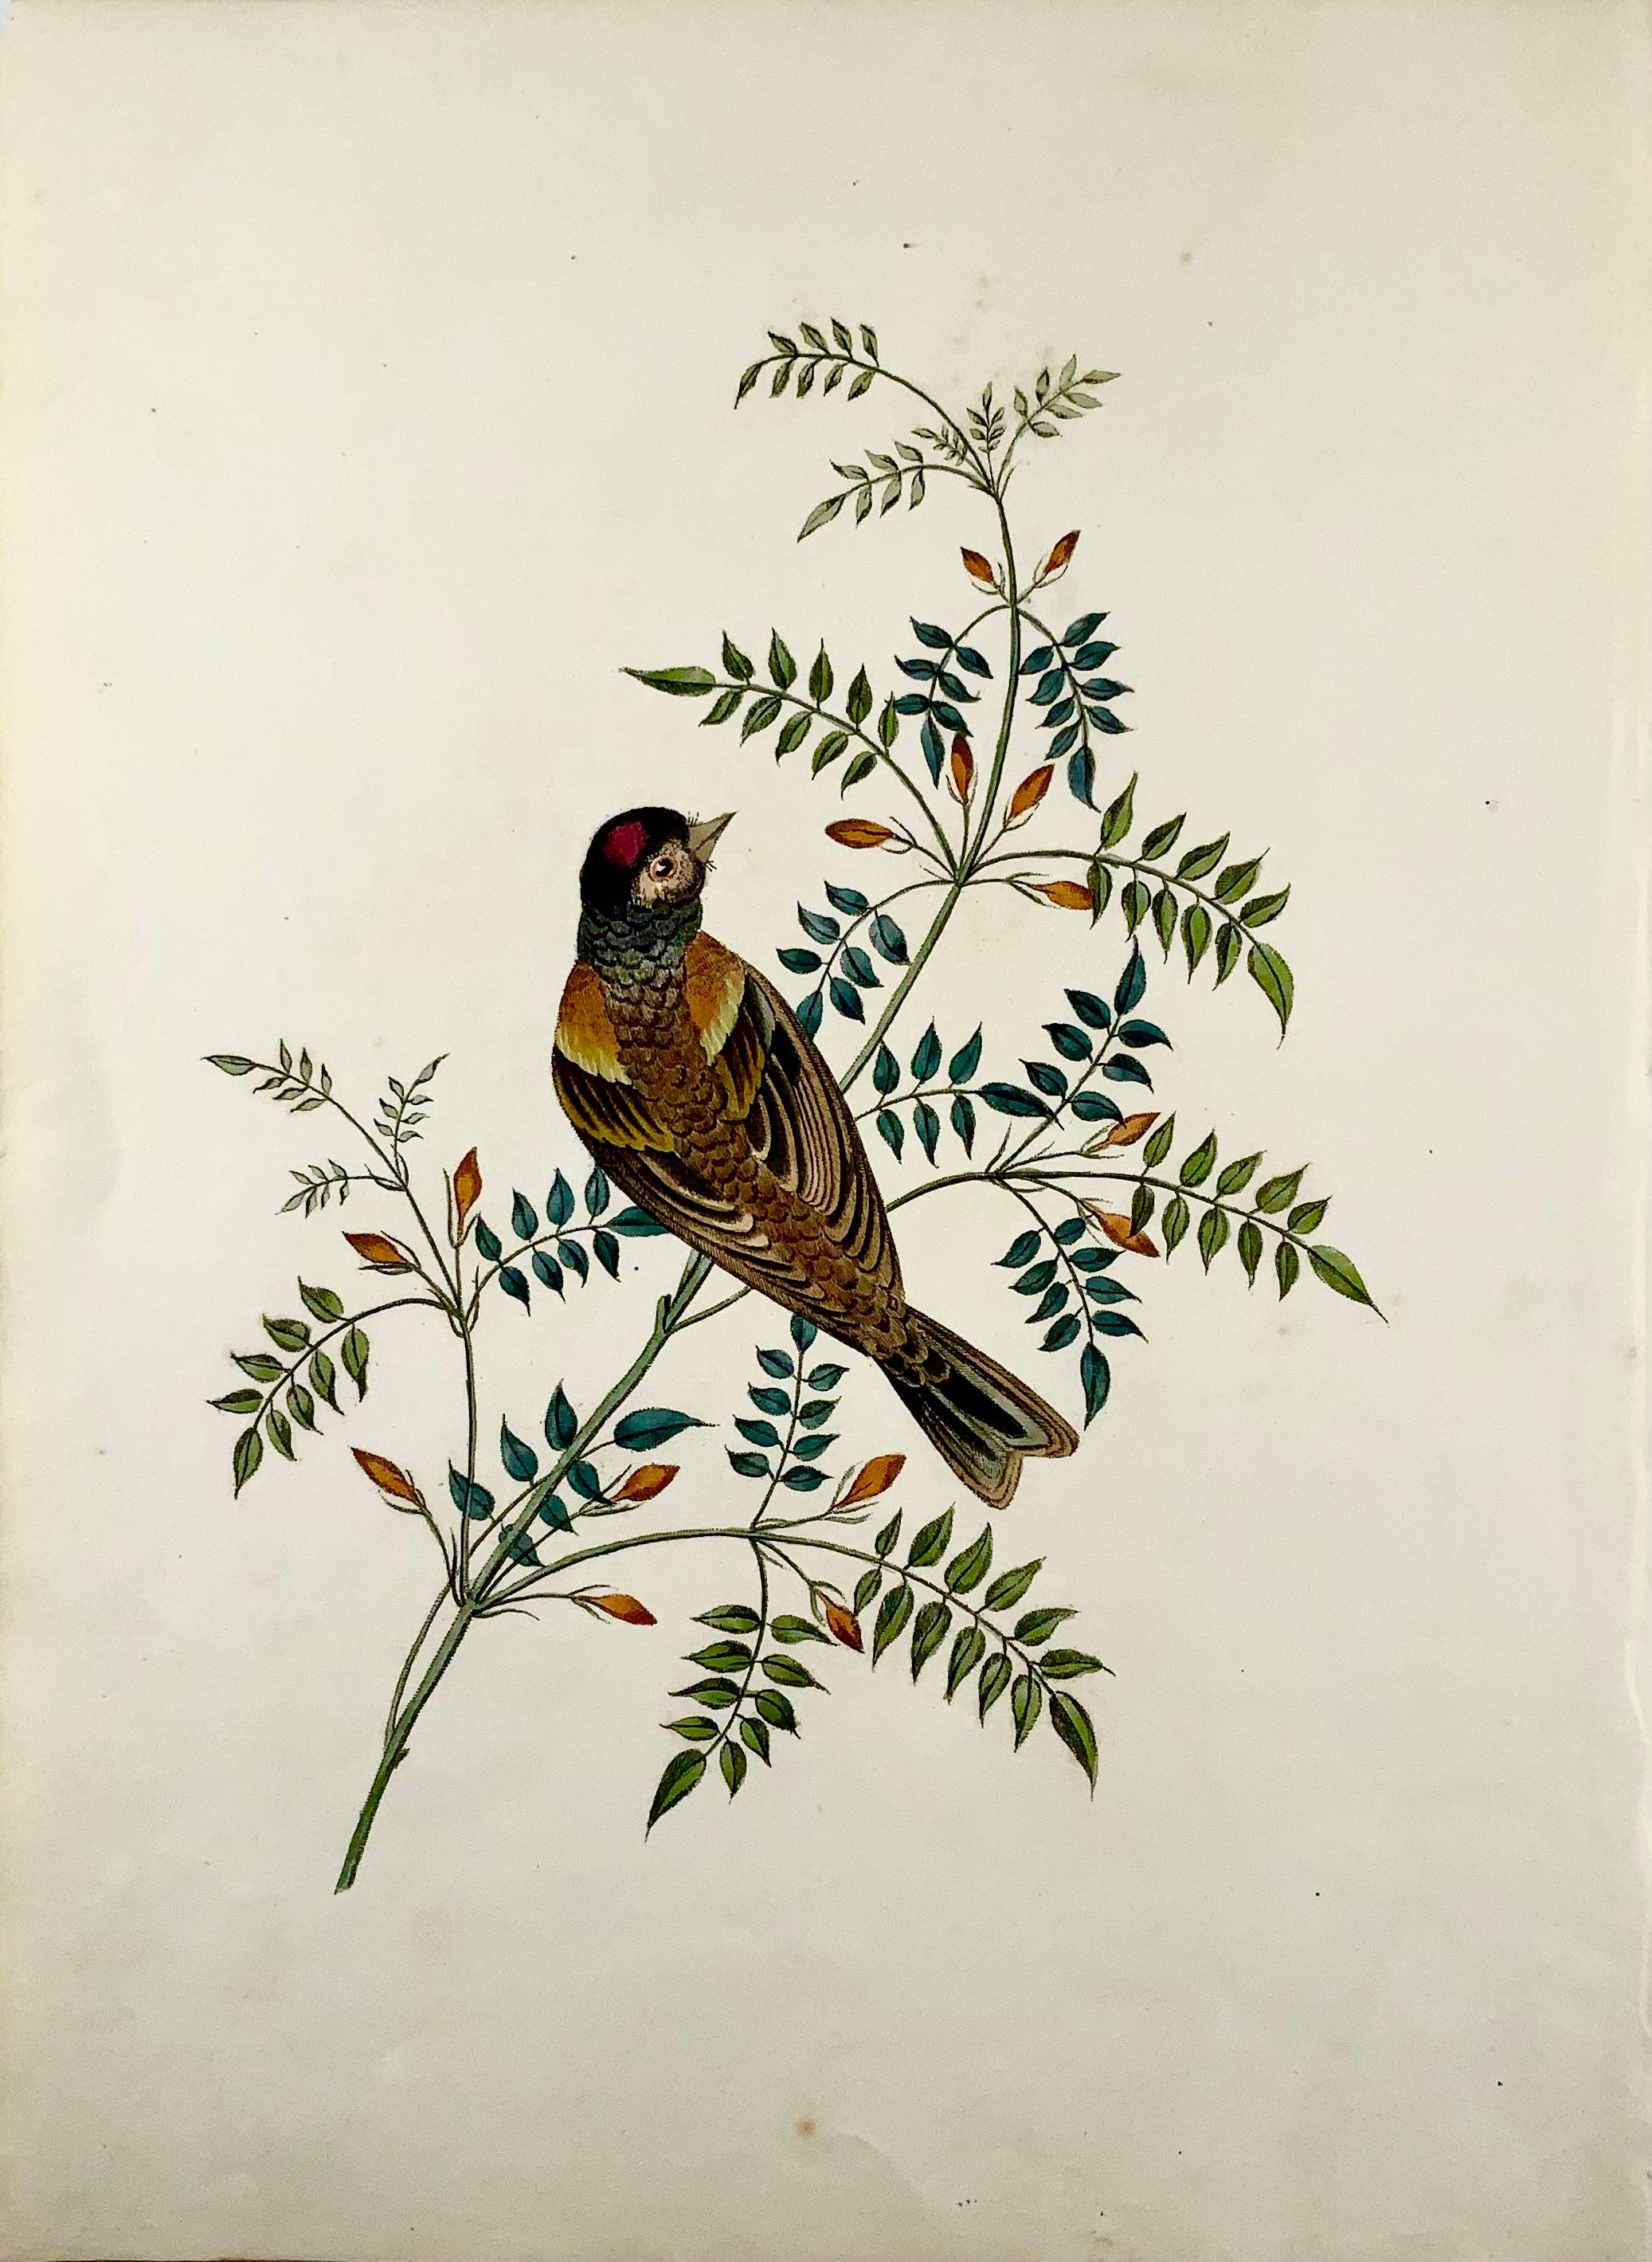 Finch

Fine large folio stipple engraving with hand colour.

On Turkey Mills Wattman paper.

Overall dimensions: 35.3 x 26 cm

Issued in Brookshaw’s scarce monograph: Six birds, accurately drawn and coloured after nature, with full